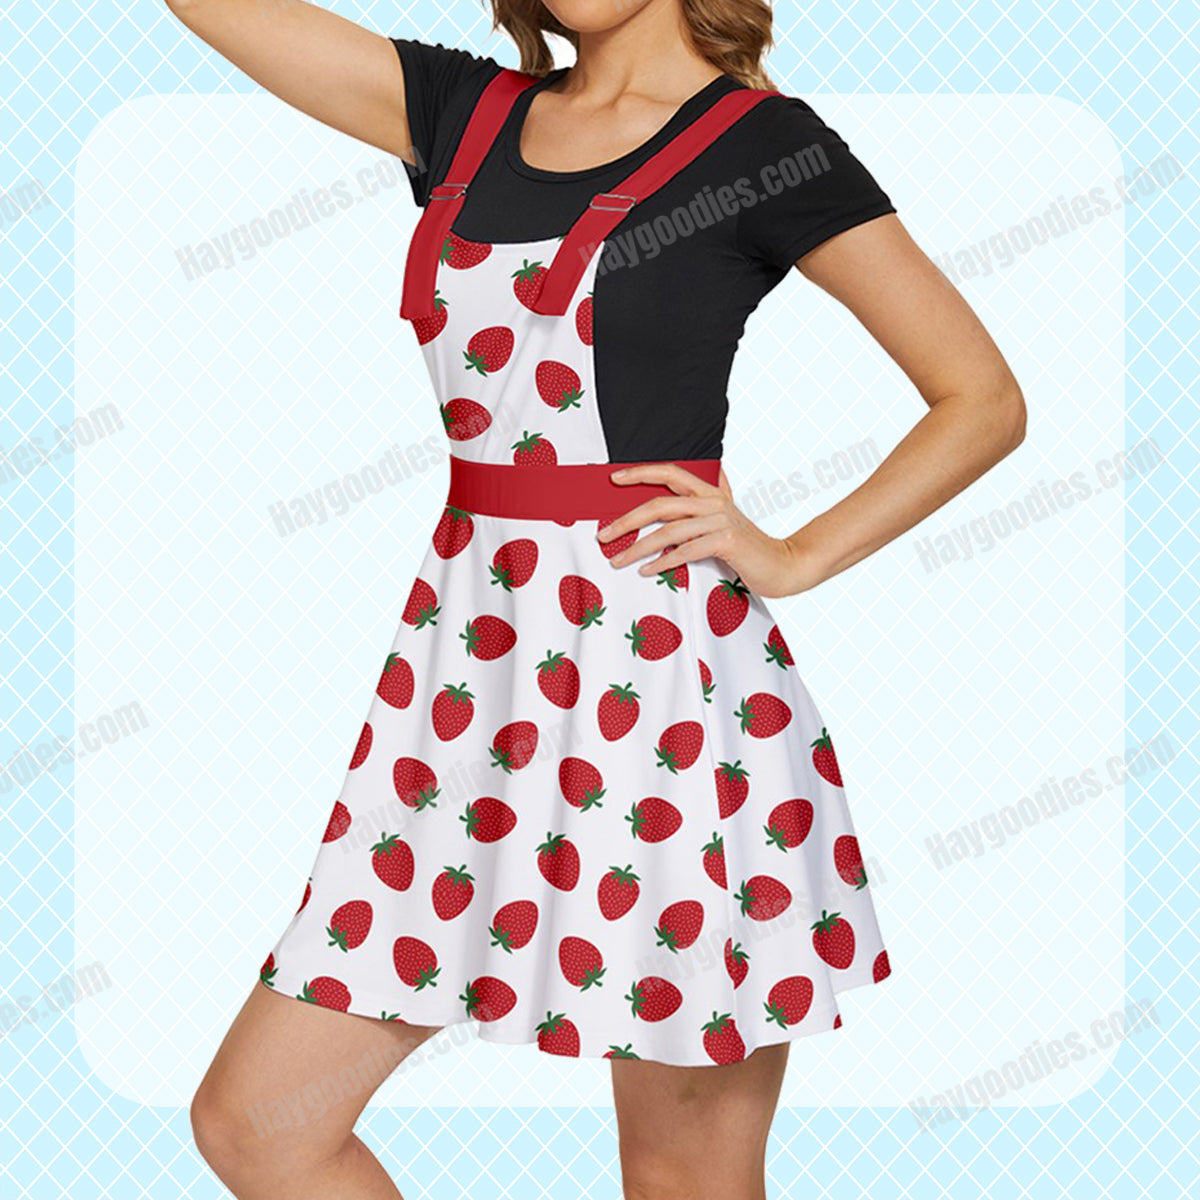 Cute Red Strawberries Pattern Overalls Dress-XS to 5XL